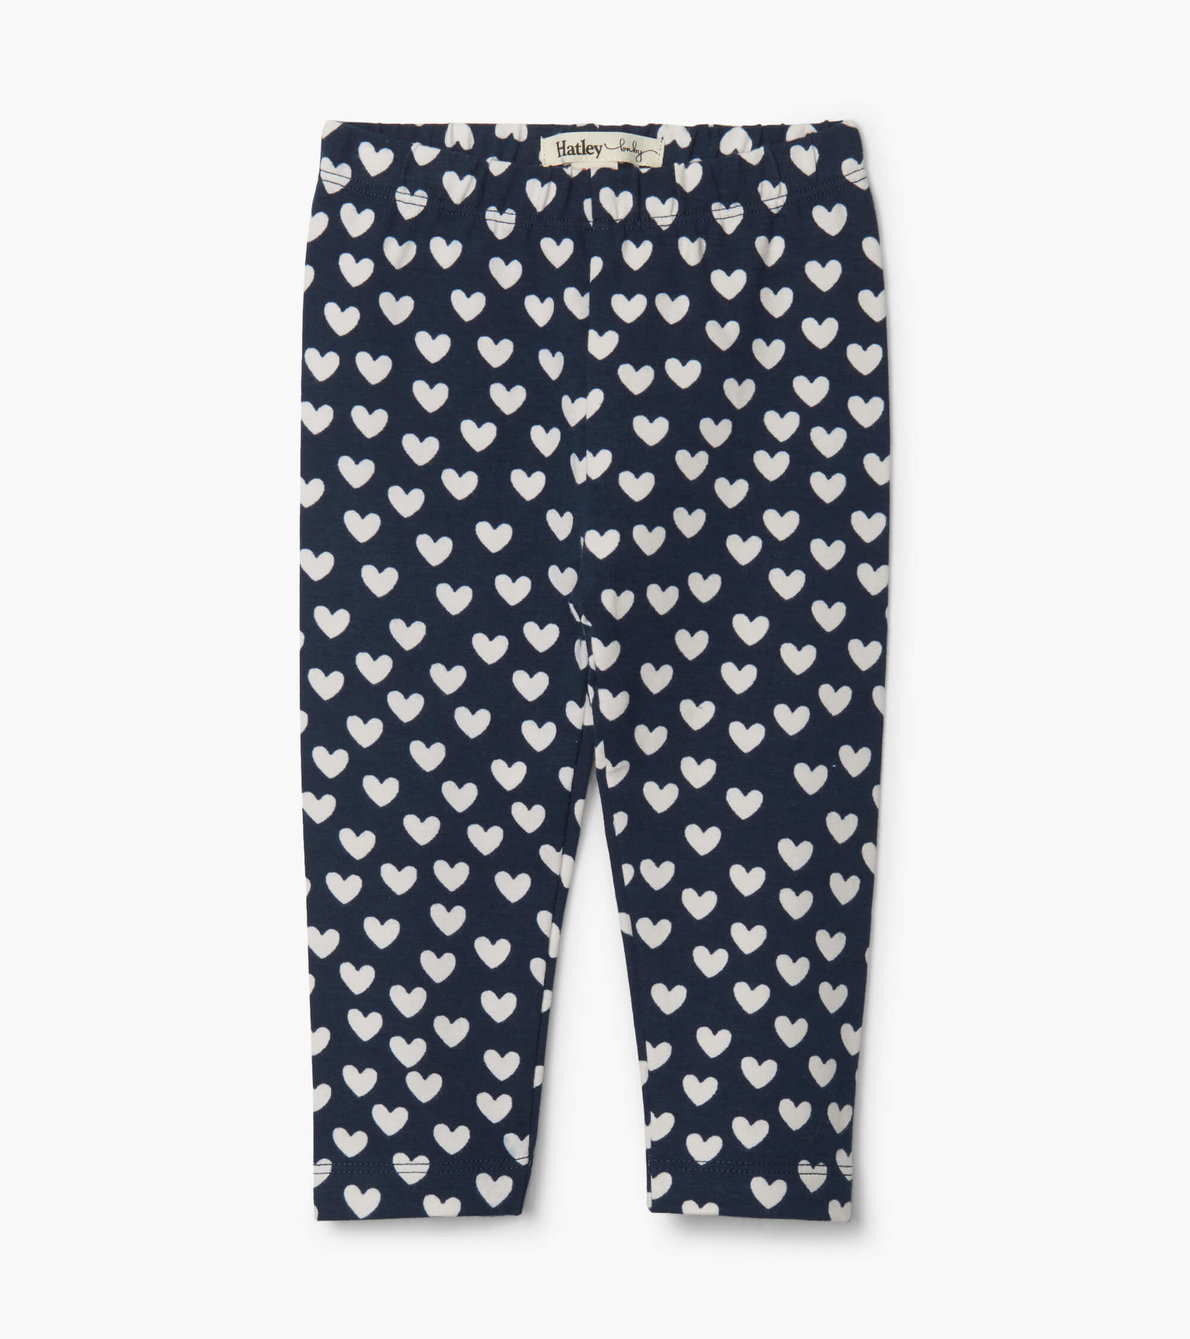 View larger image of Heart Cluster Baby Leggings